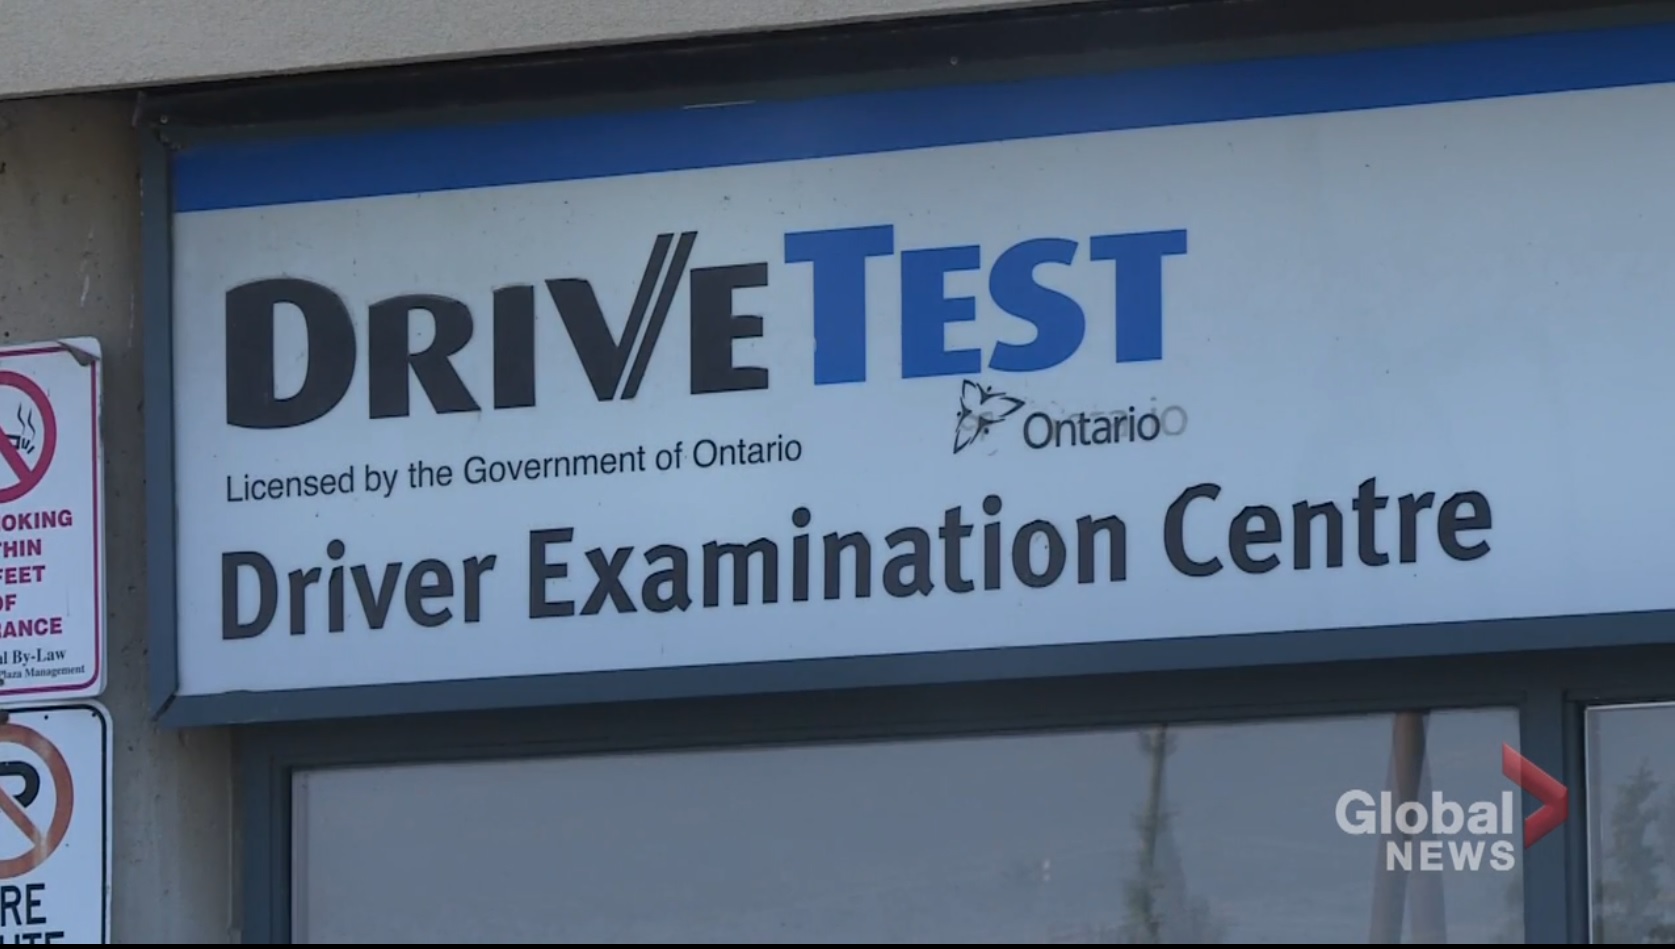 drive test ontario hours of operation